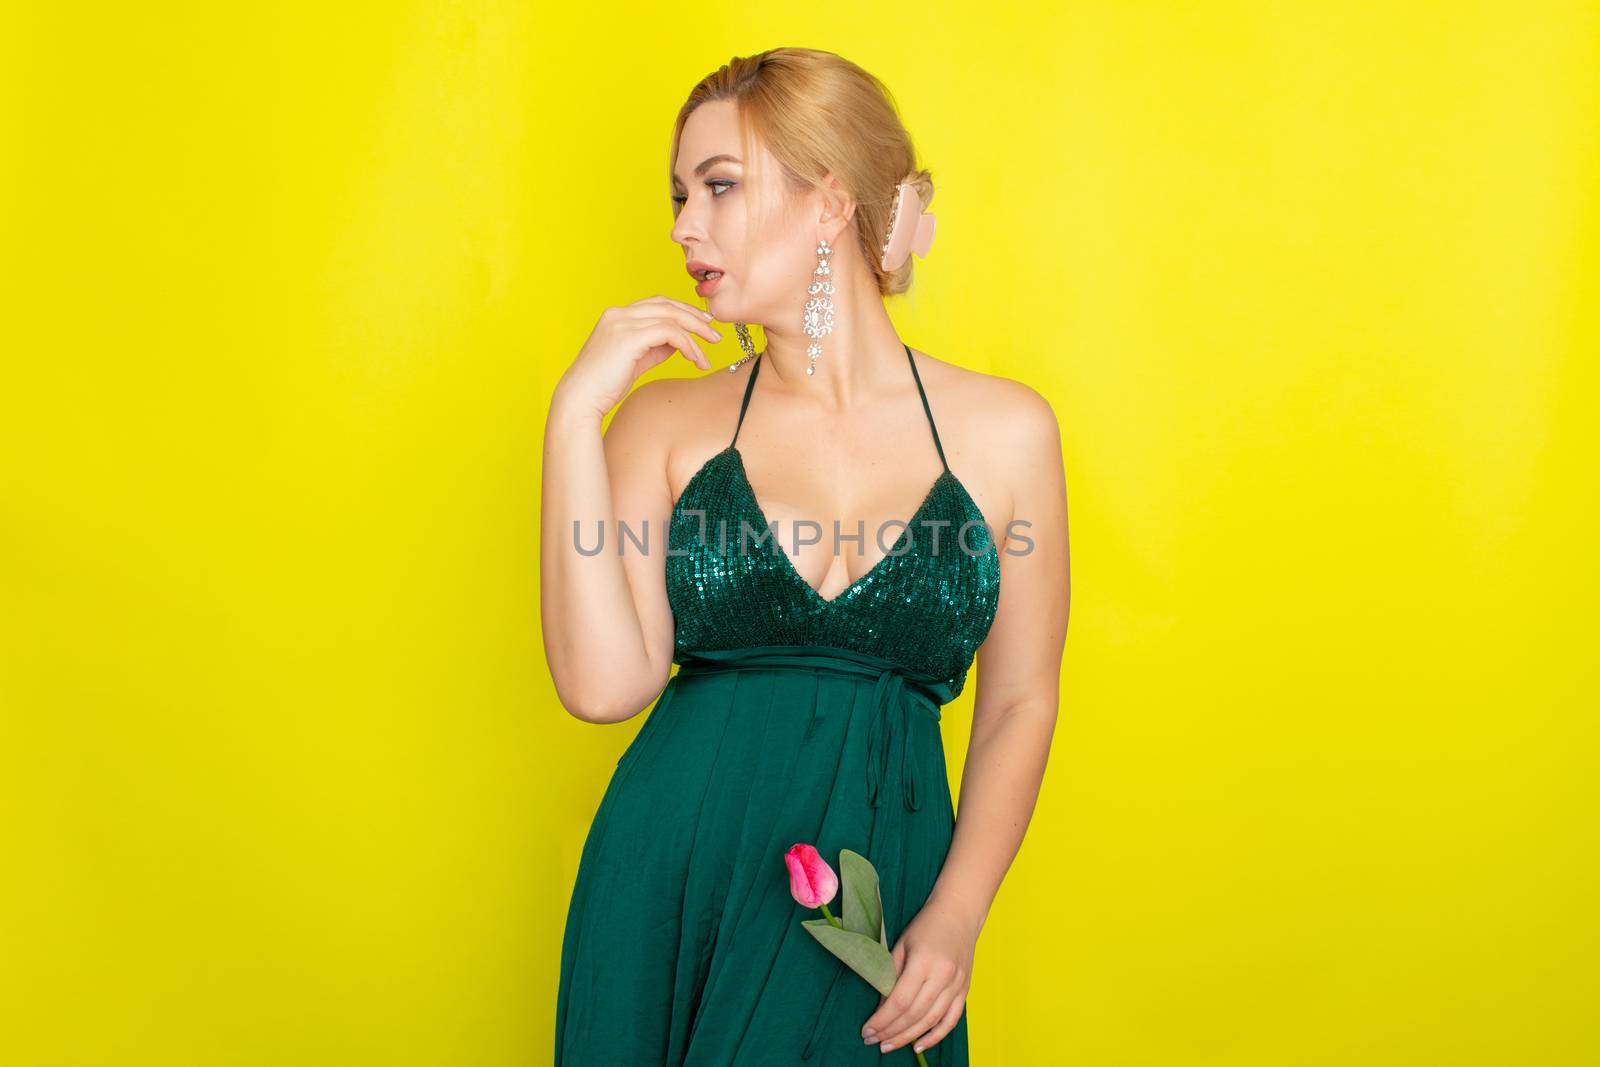 Blonde woman in green evening dress holding one tulip in her hands over yellow background